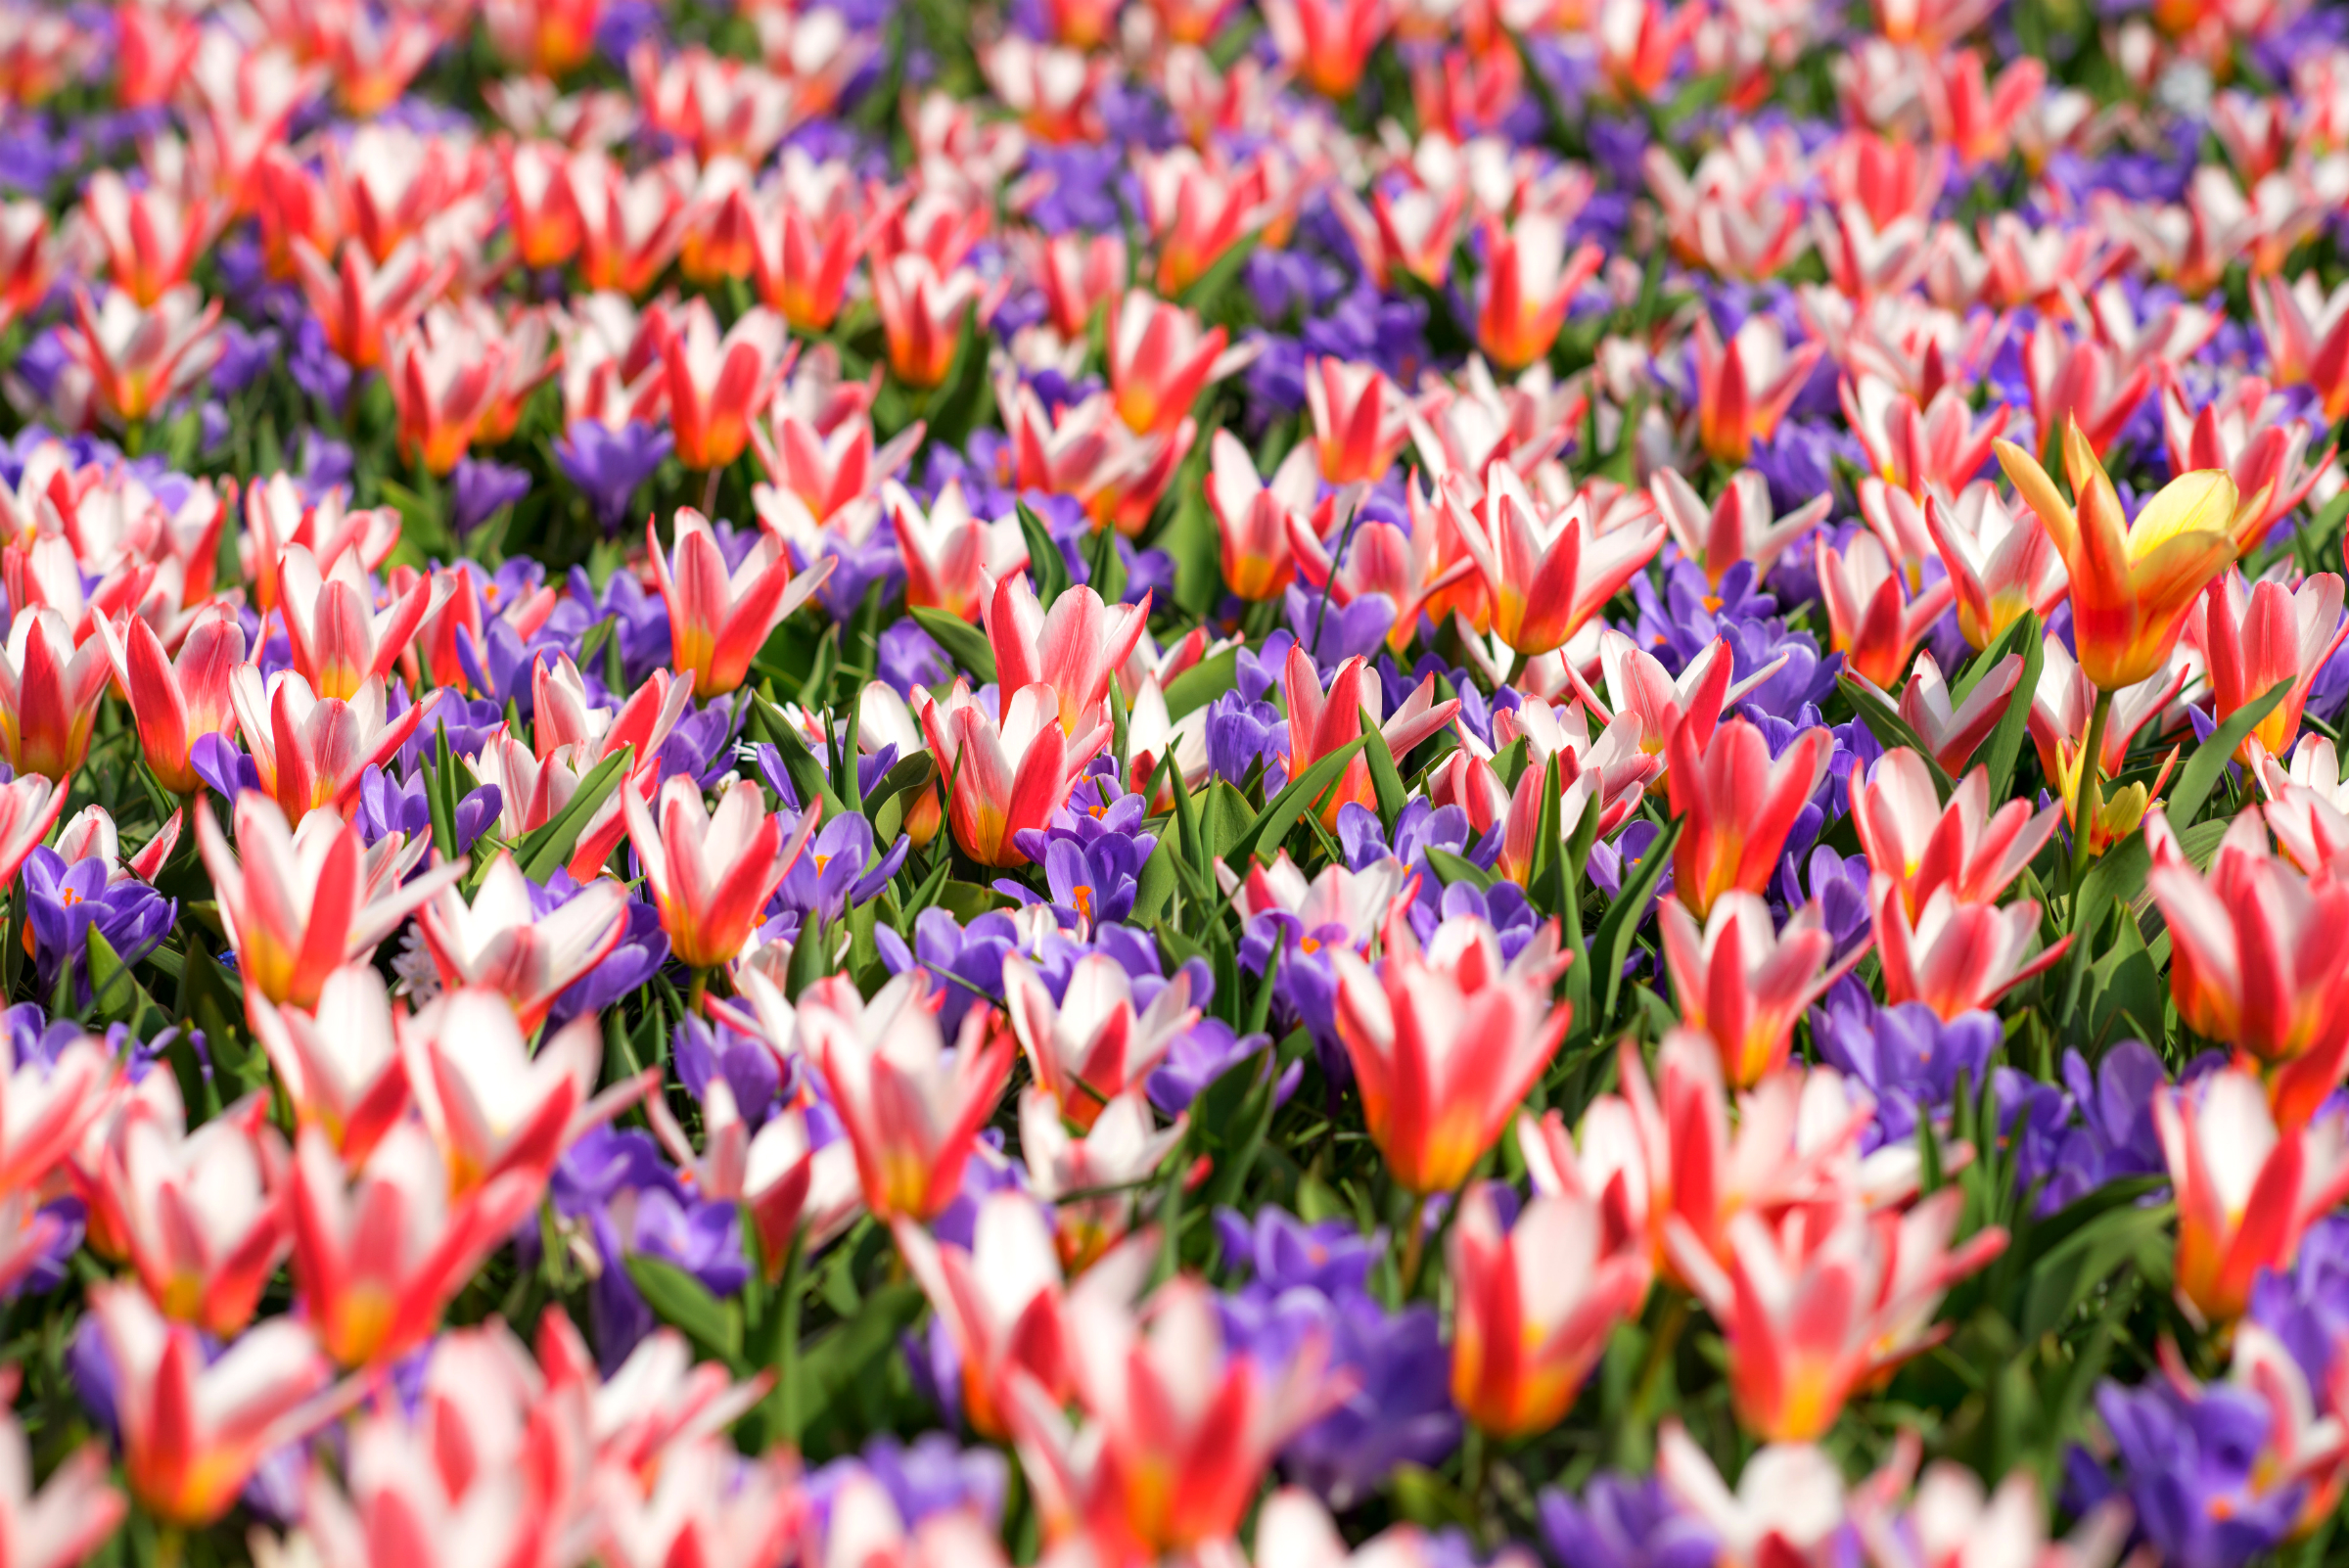 General 2400x1602 colorful flowers plants